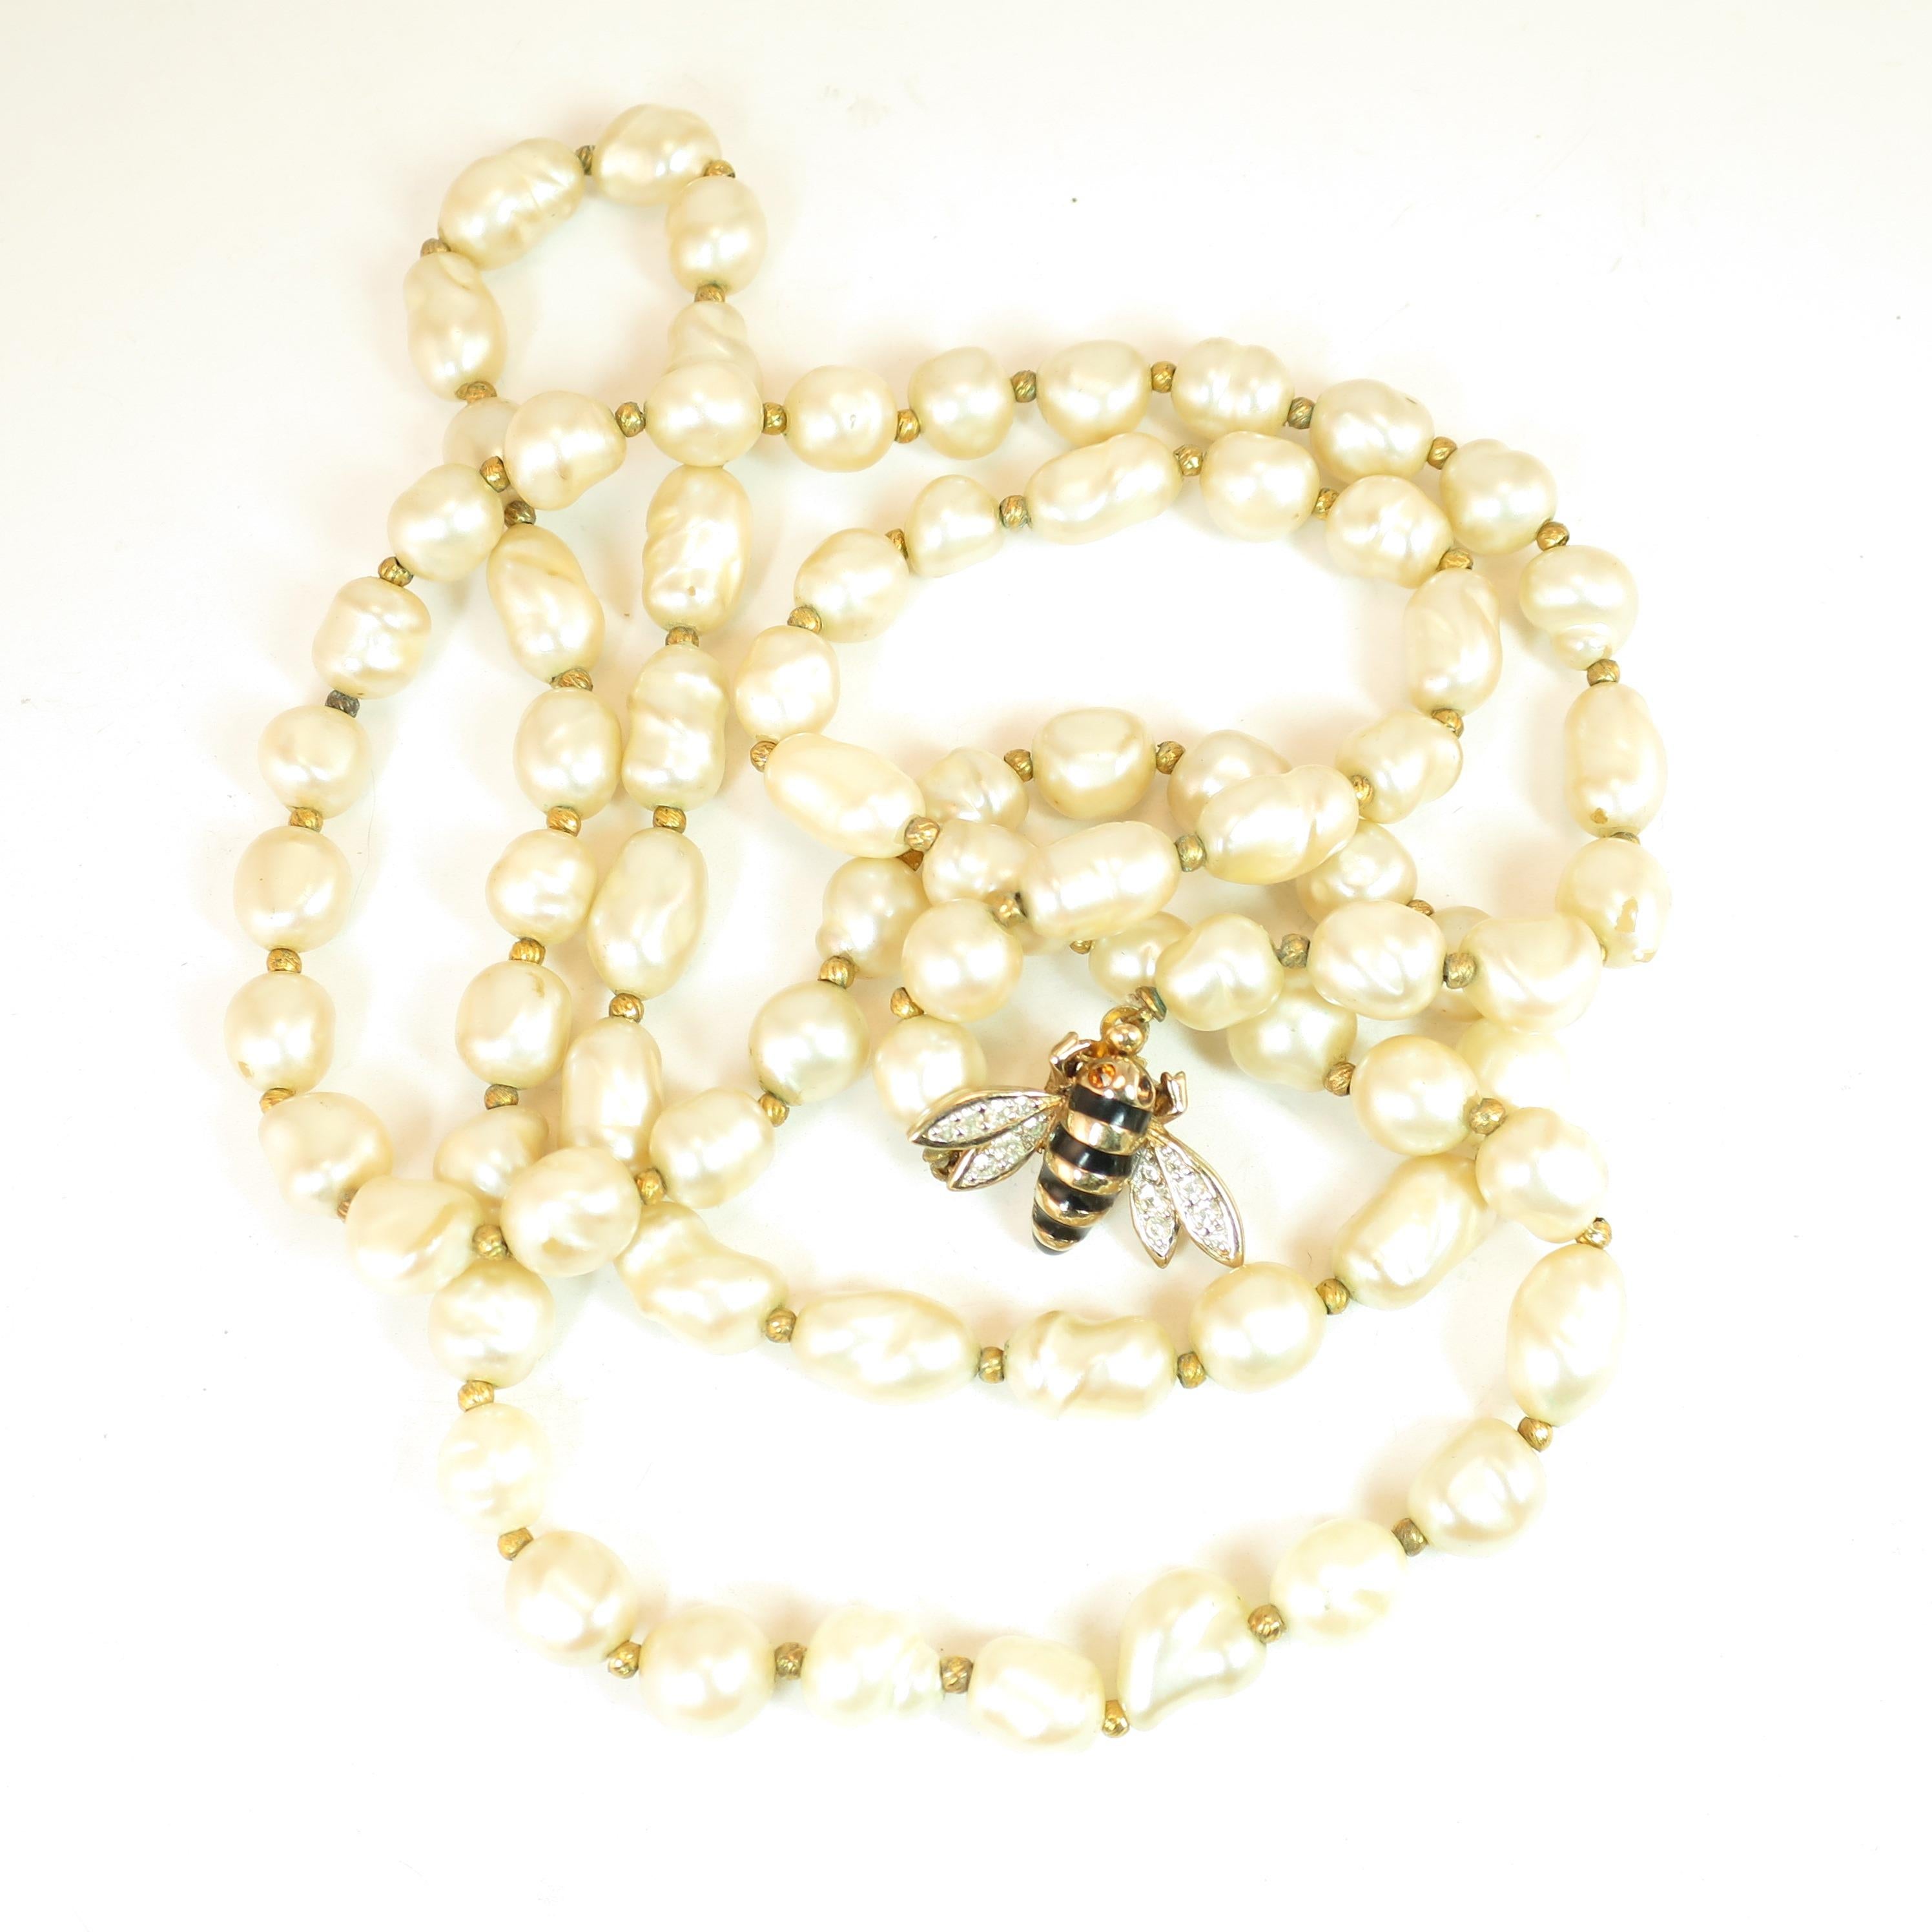 Panetta Faux Baroque Pearl Necklace With Enameled Bee Clasp, 1950s In Good Condition For Sale In Burbank, CA